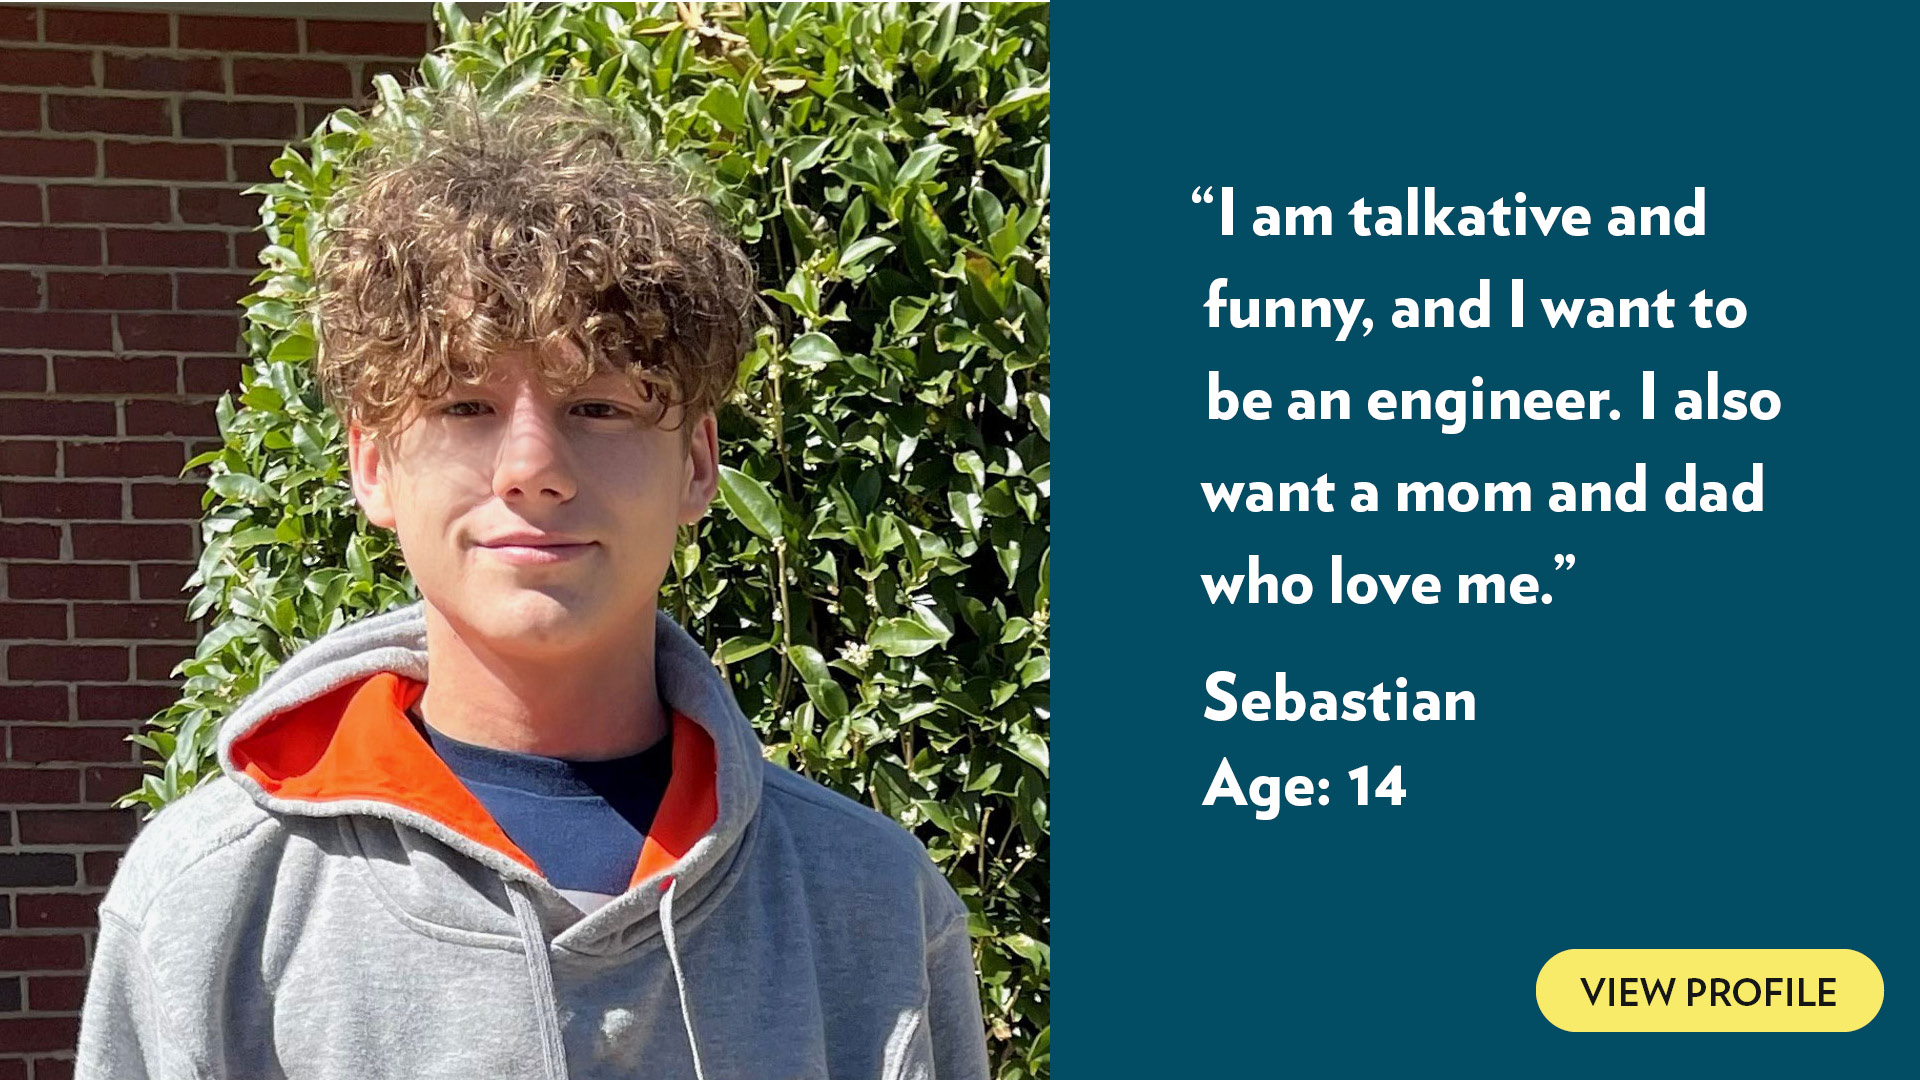 I am talkative and funny, and I want to be an engineer. I also want a mom and dad who love me. Sebastian, age 14. View profile.